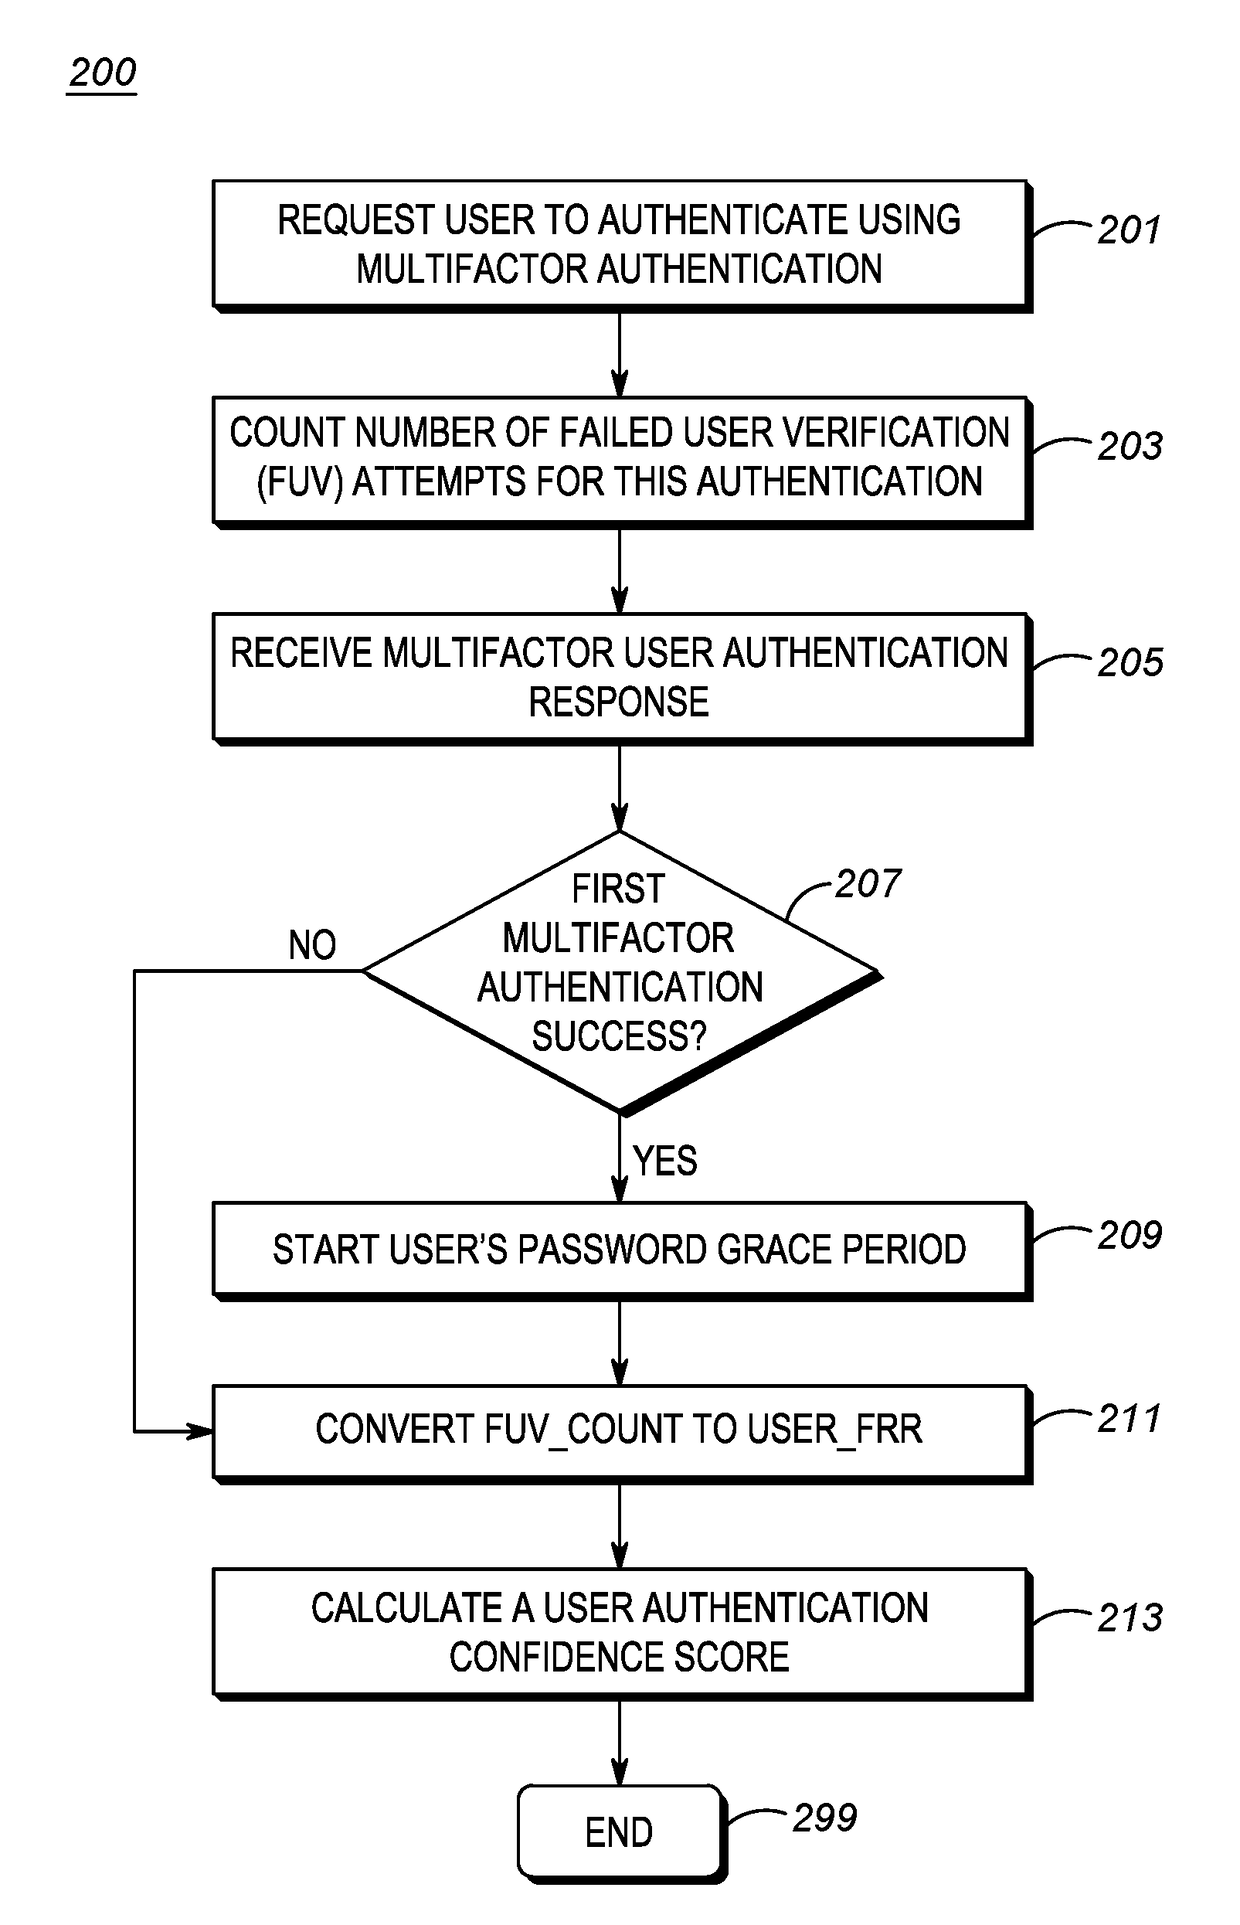 Method for automatically deleting a user password upon successful use of a multi-factor authentication modality